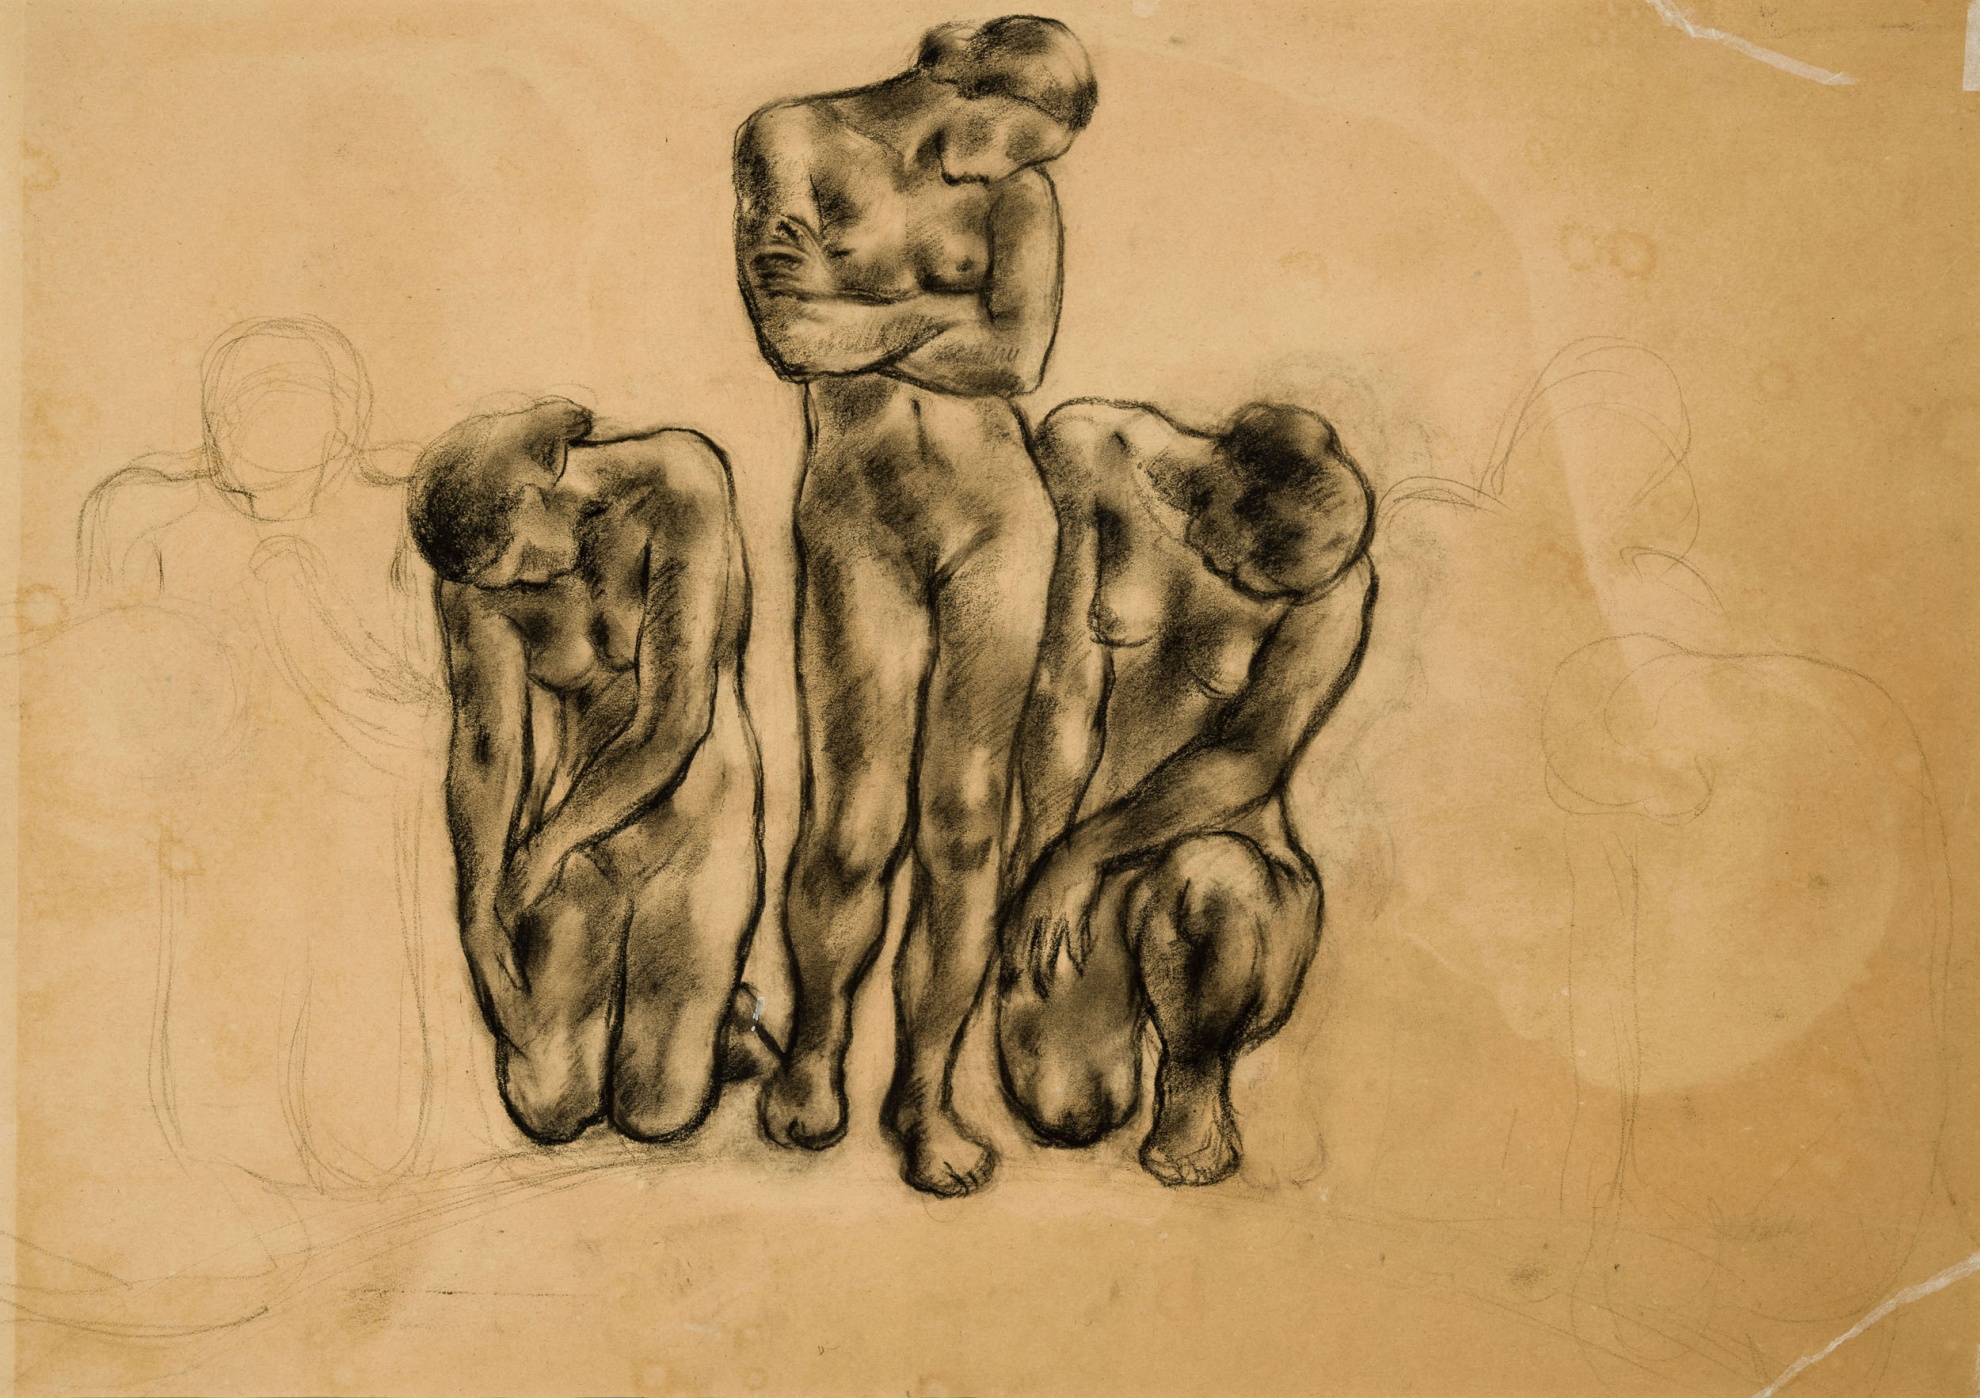 untitled (group nude study),
(Verso of nude with vase)

(The Salgo Trust for Education CC BY-NC-SA)